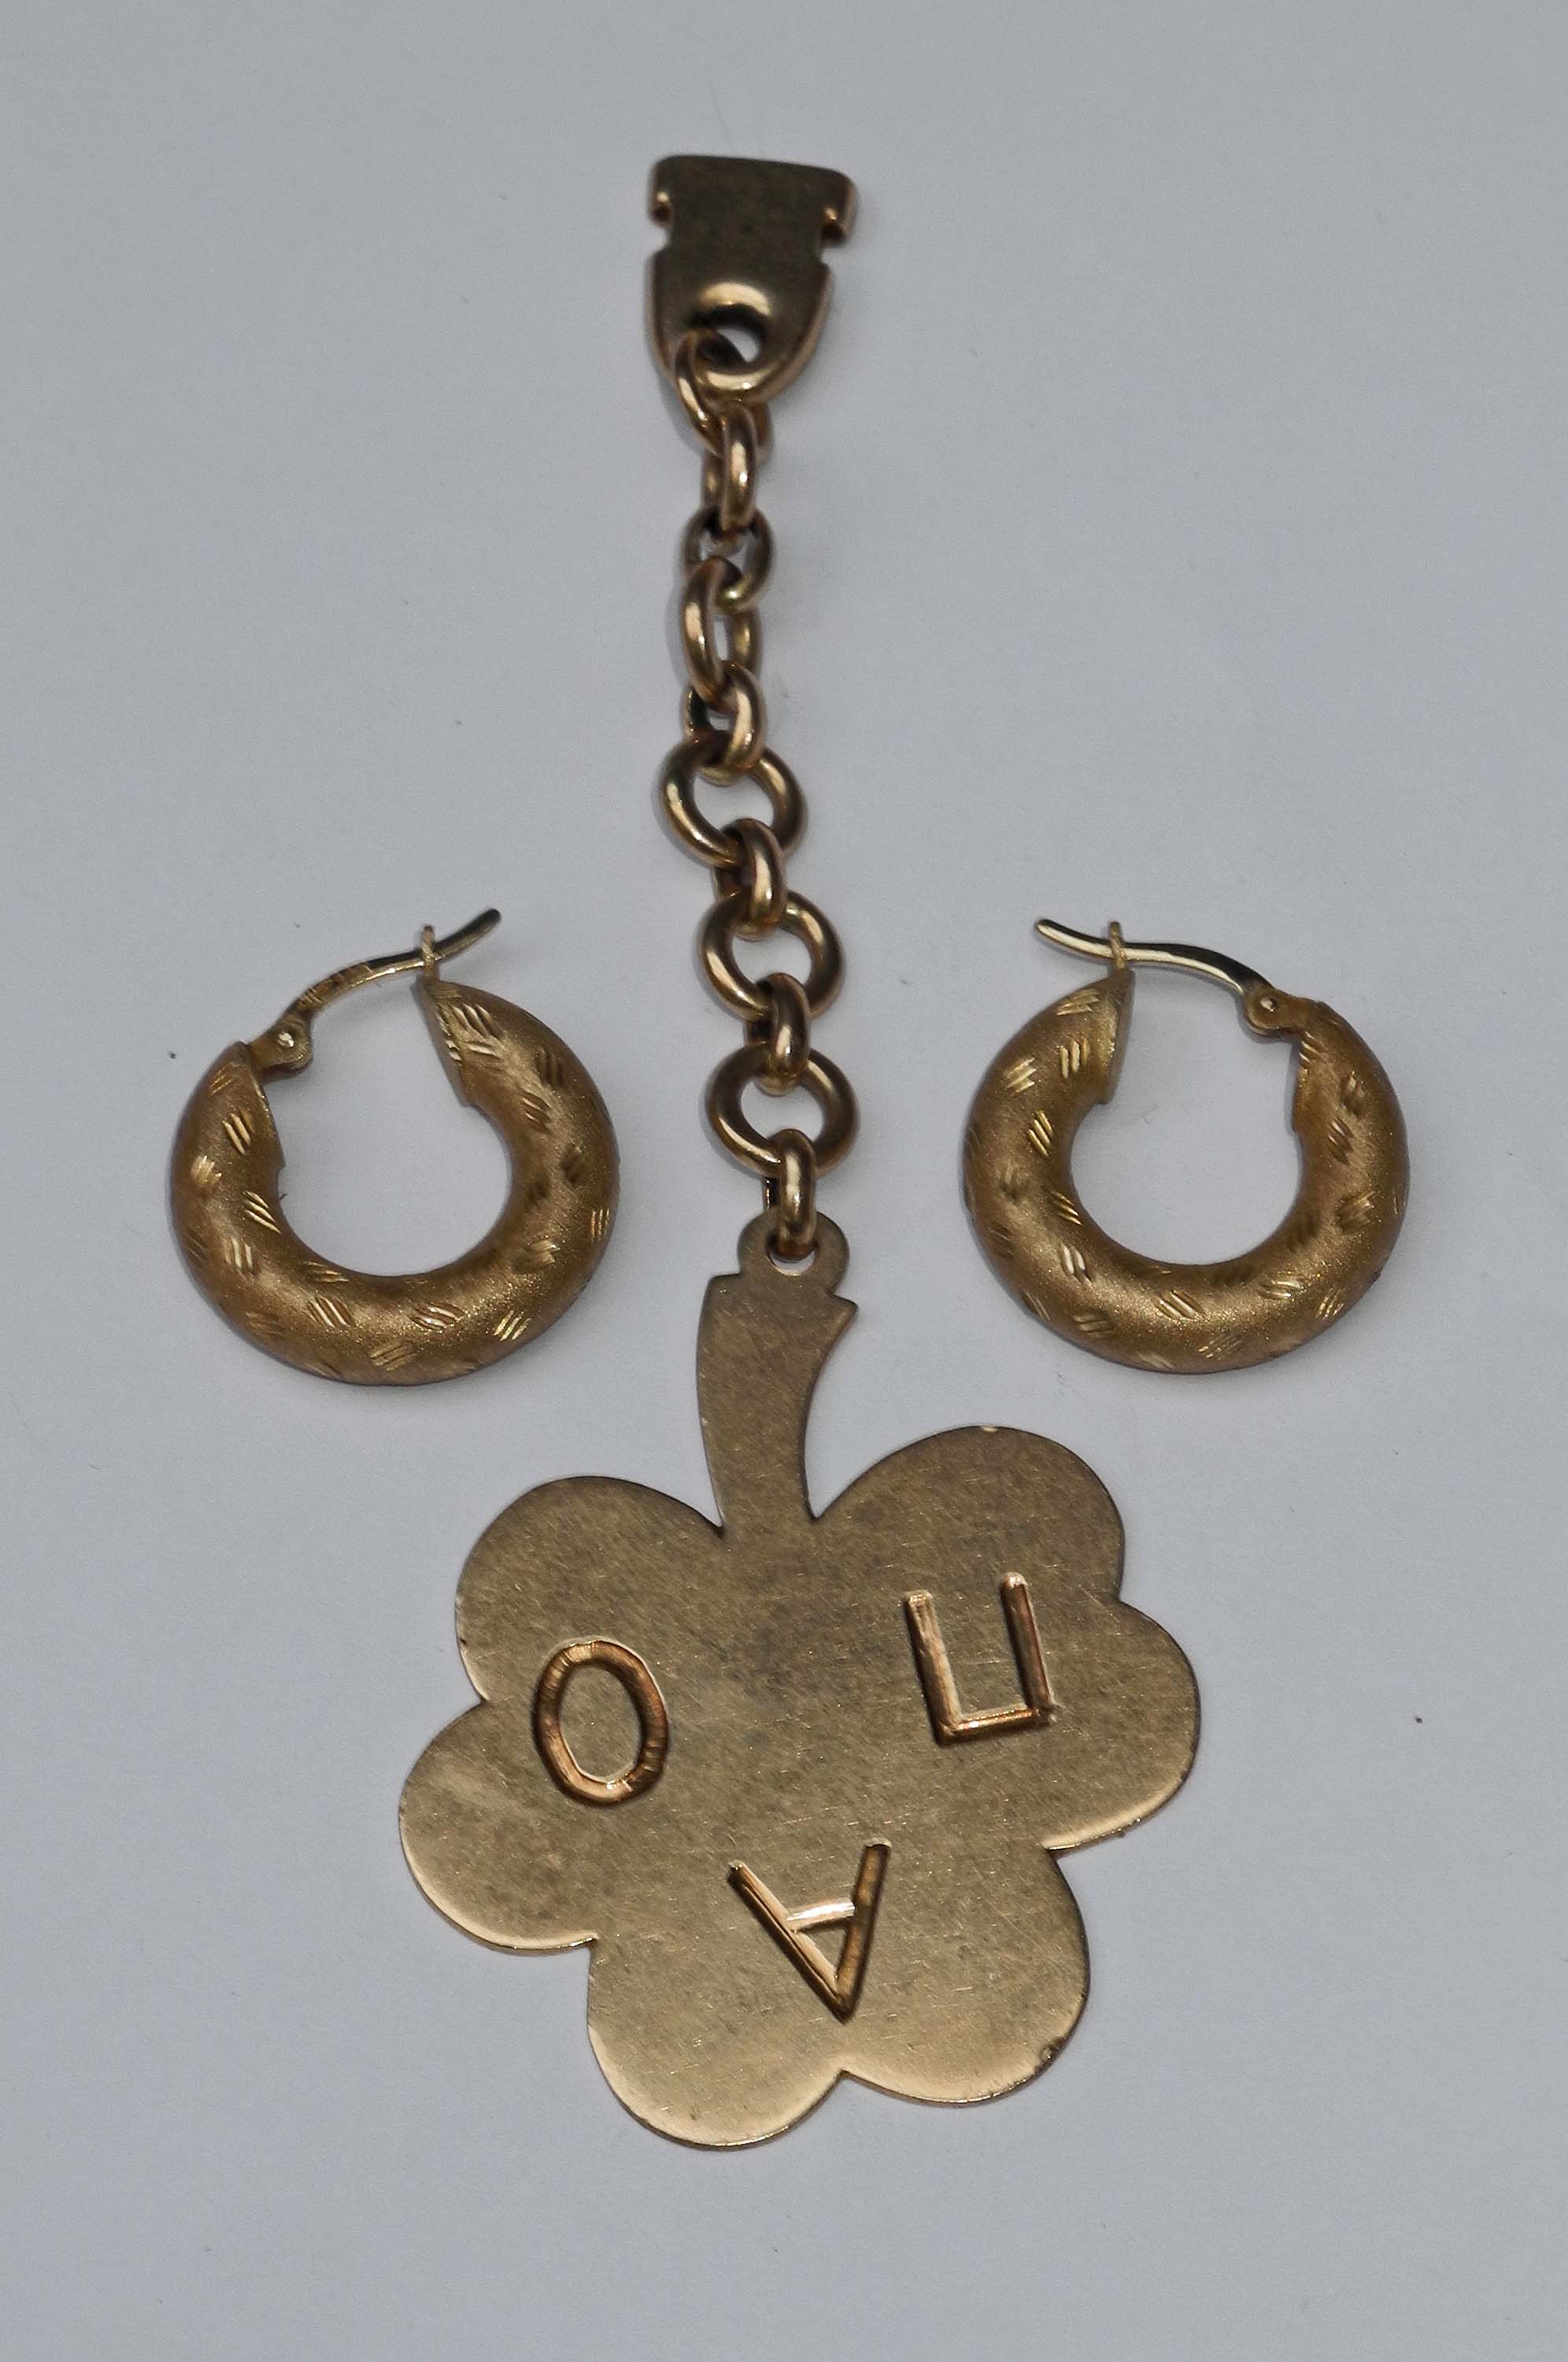 A pair of 14k gold hoop earrings, sold together with a clover leaf on chain. (3)